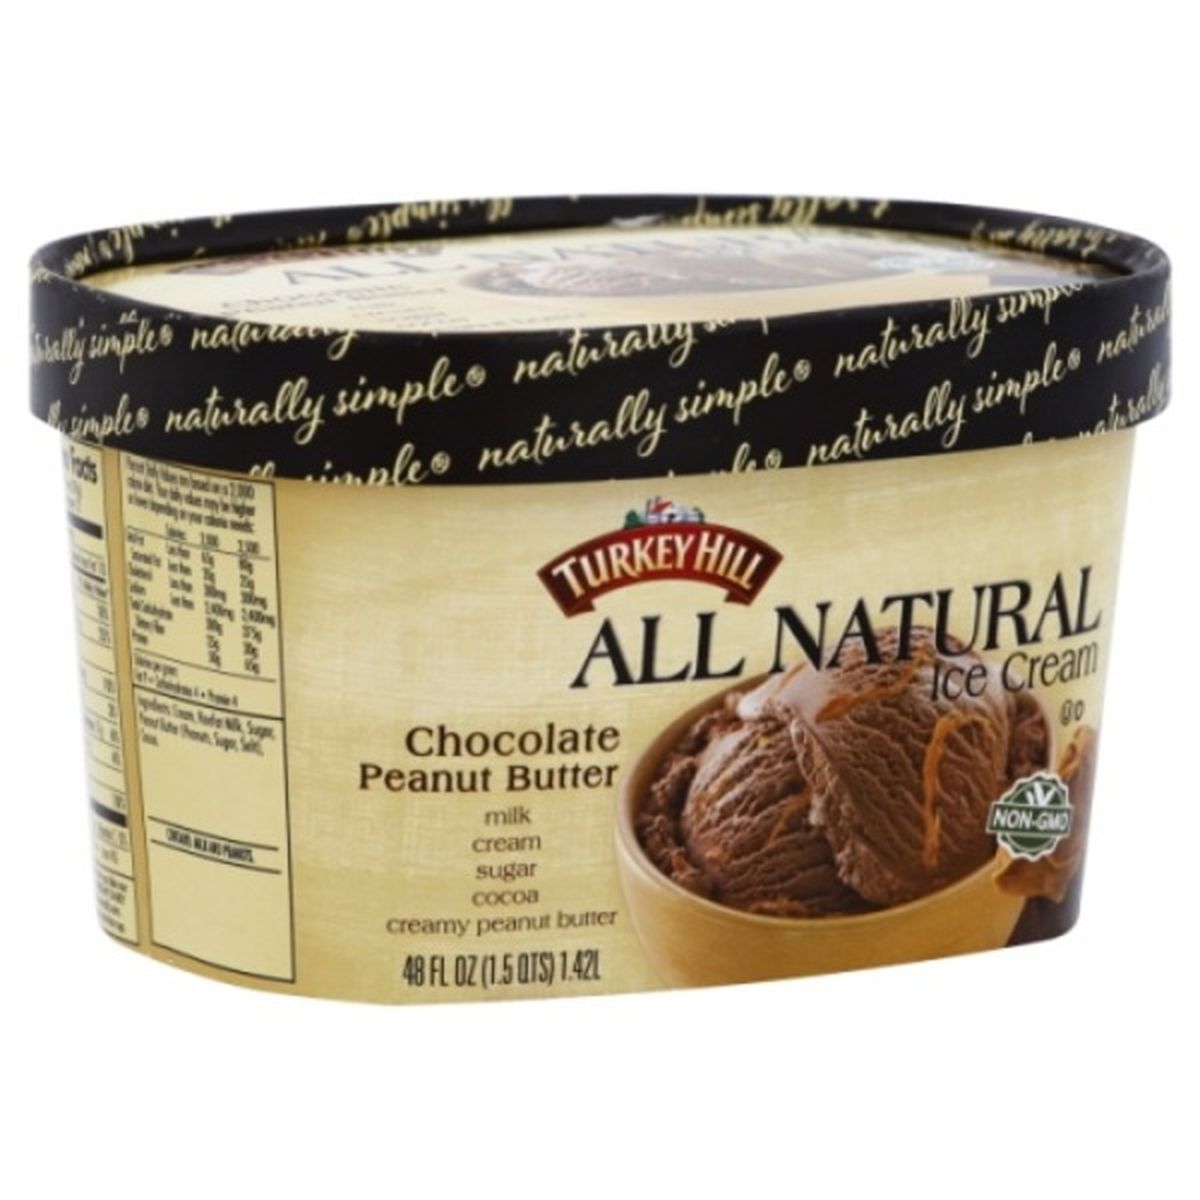 Calories in Turkey Hill Naturally Simple Ice Cream, Chocolate Peanut Butter